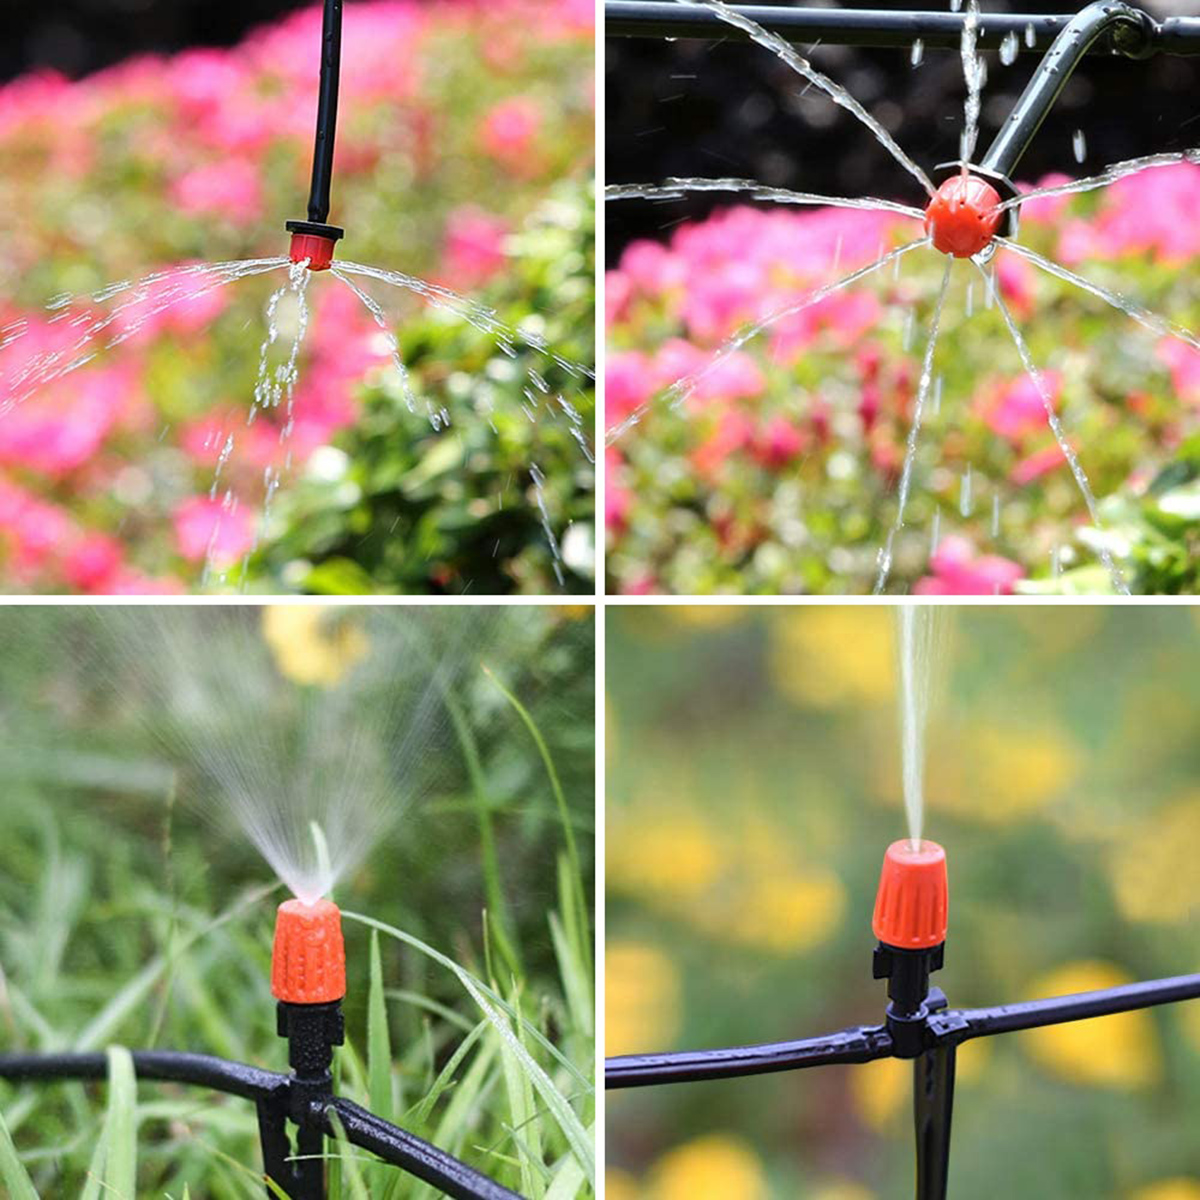 15M Micro Drip Irrigation Kit Drip UV-resistant Automatic Irrigation System for Greenhouse Garden Patio